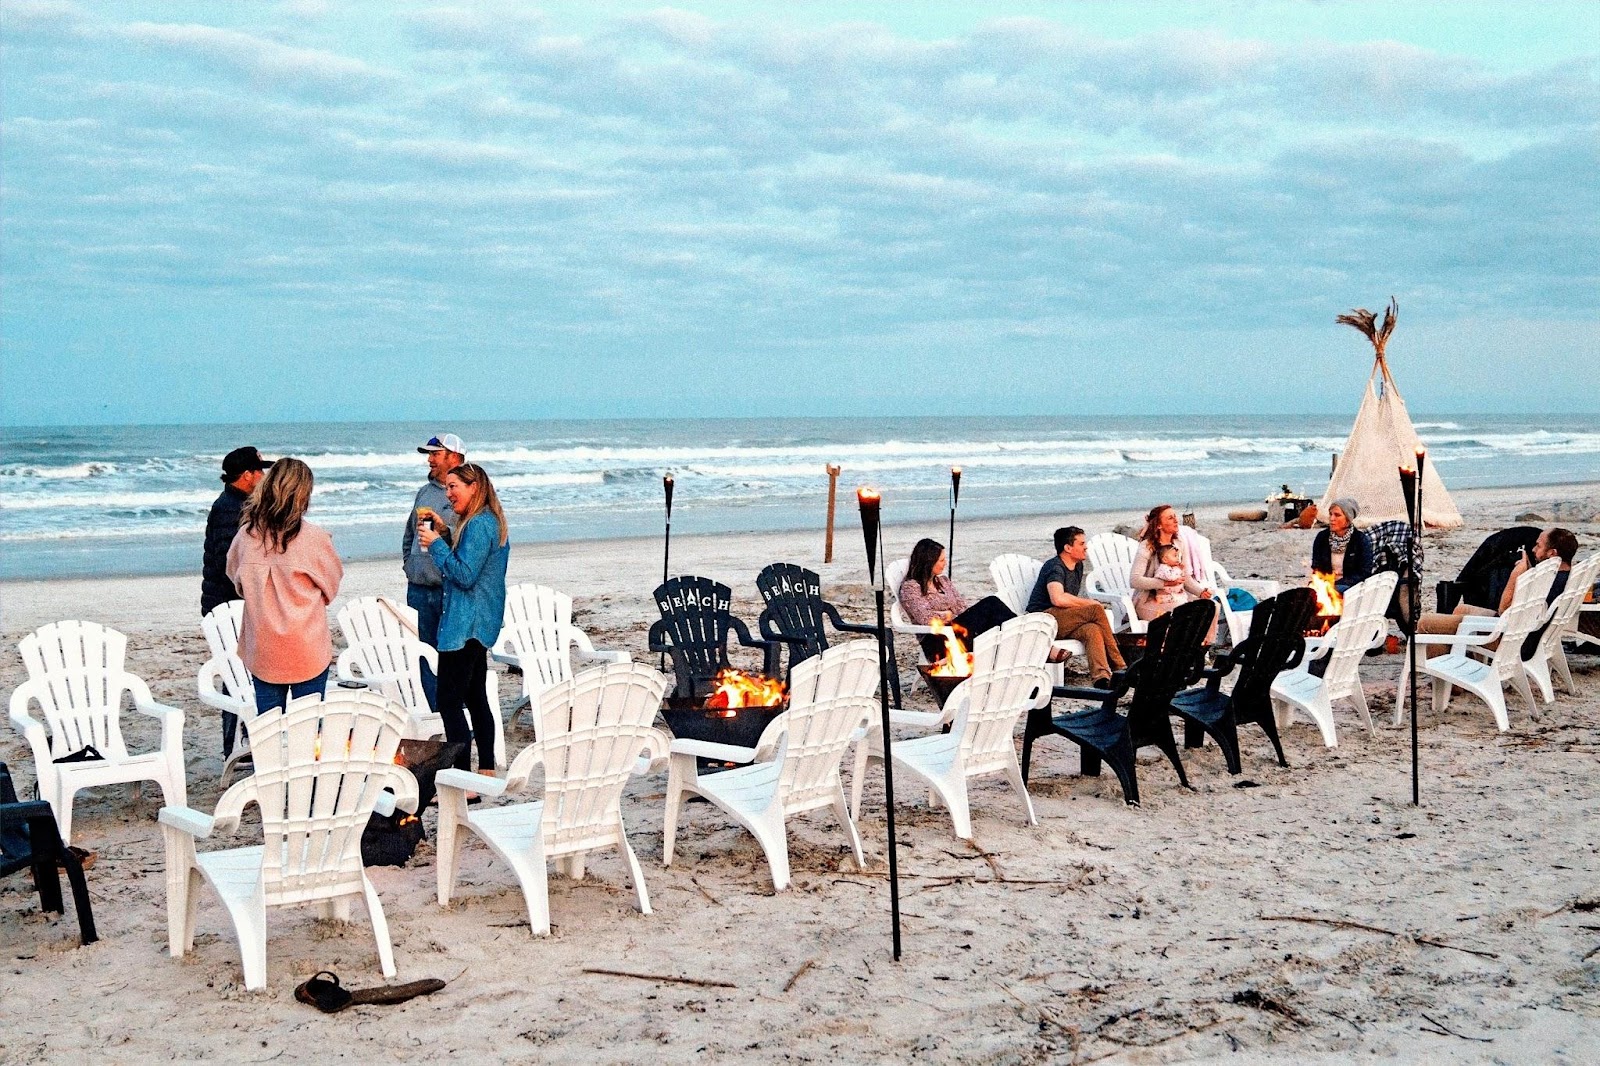 Beach Campfires offers complete hosting and setting up of campfires for family reunions, special celebrations, corporate retreats and team building events.